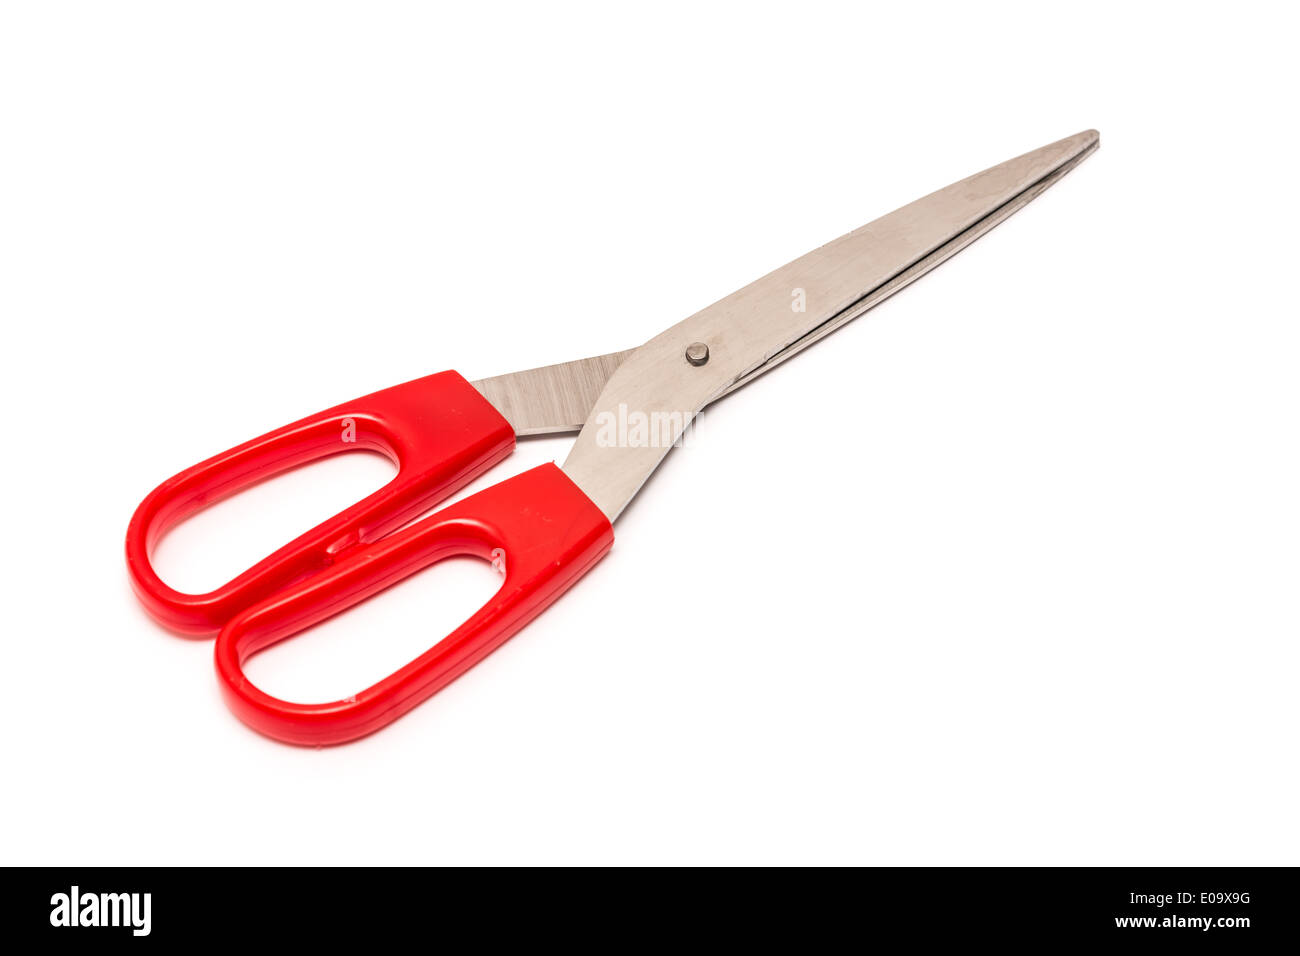 Red Scissors Isolated On White Stock Photo